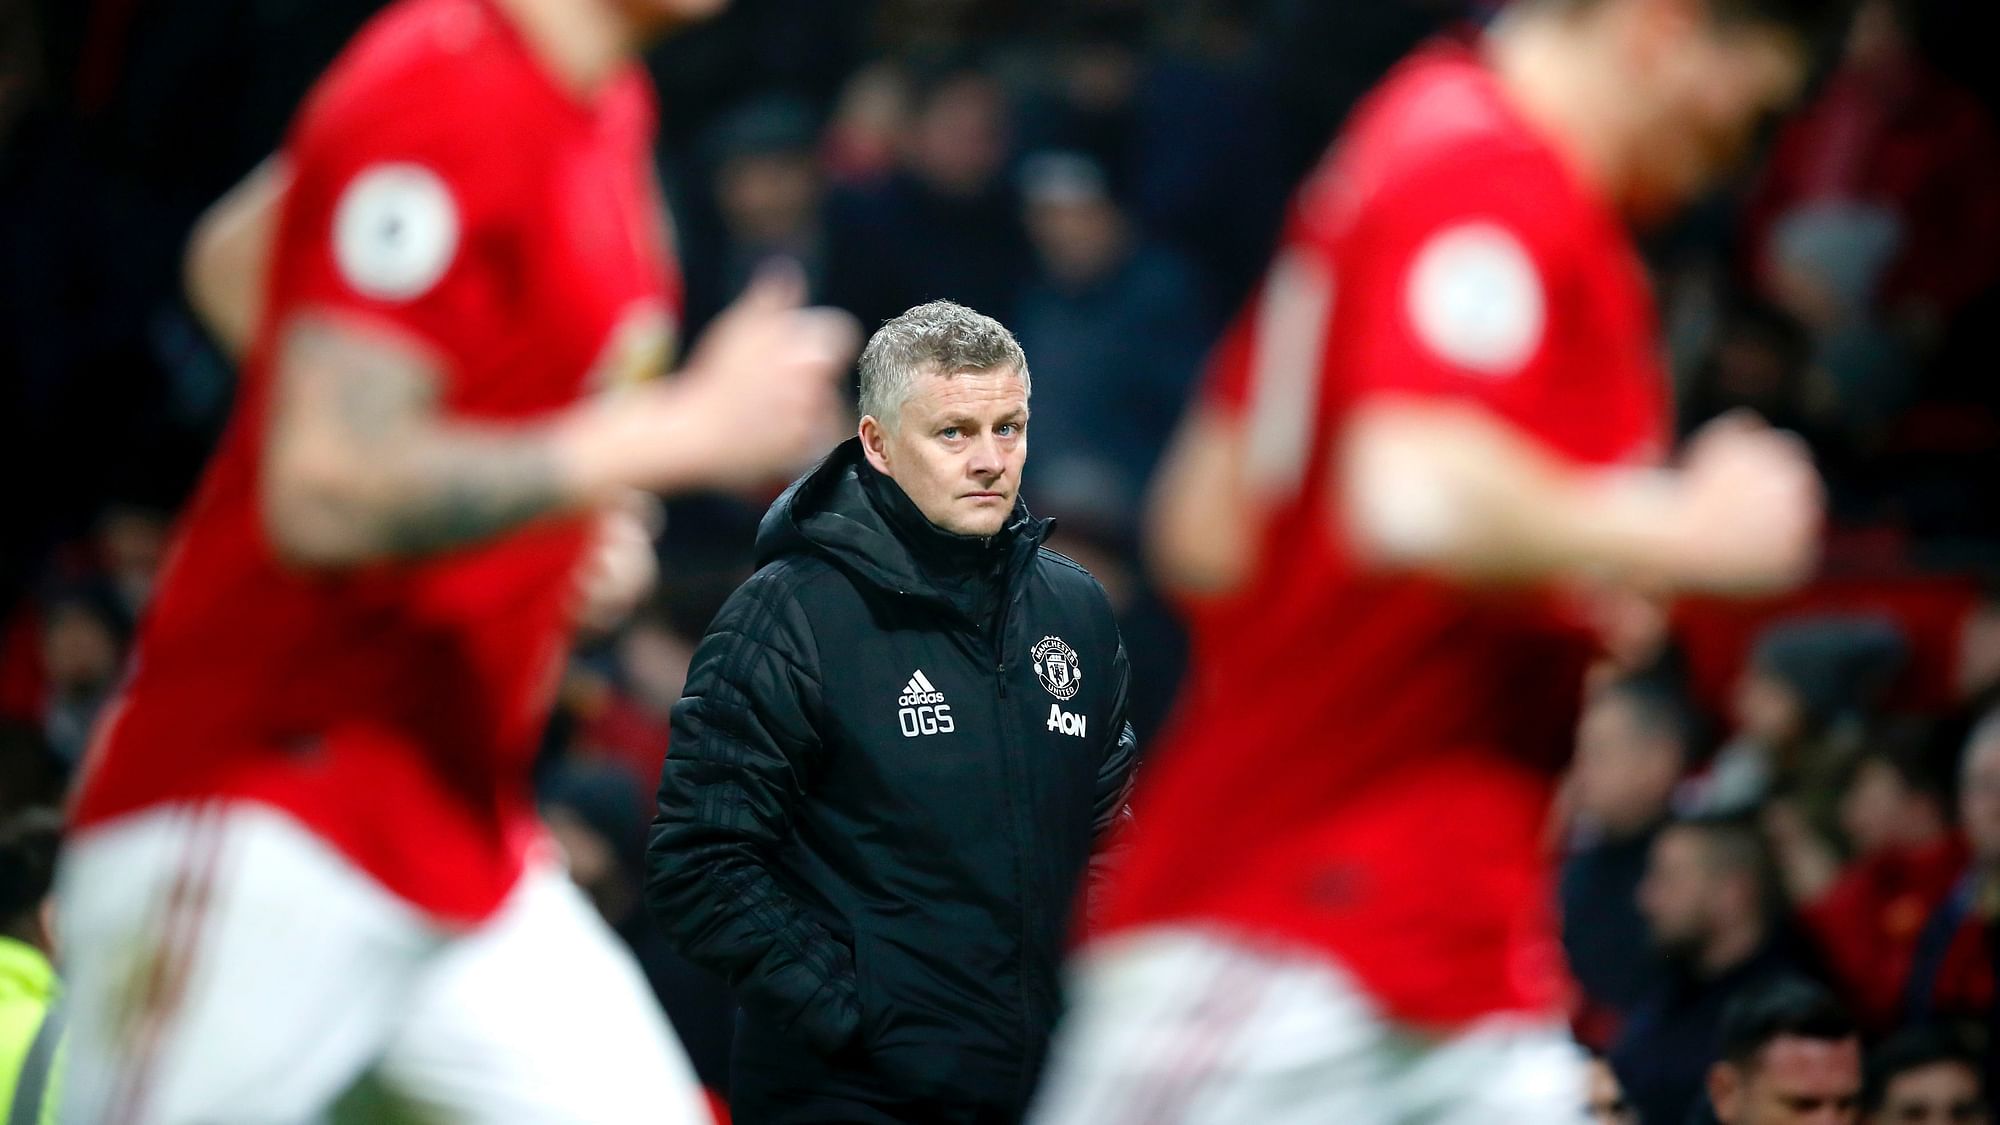 Ole Gunnar Solskjaer knows how badly he’s doing at Manchester United. However, the manager can’t seem to find any solutions.